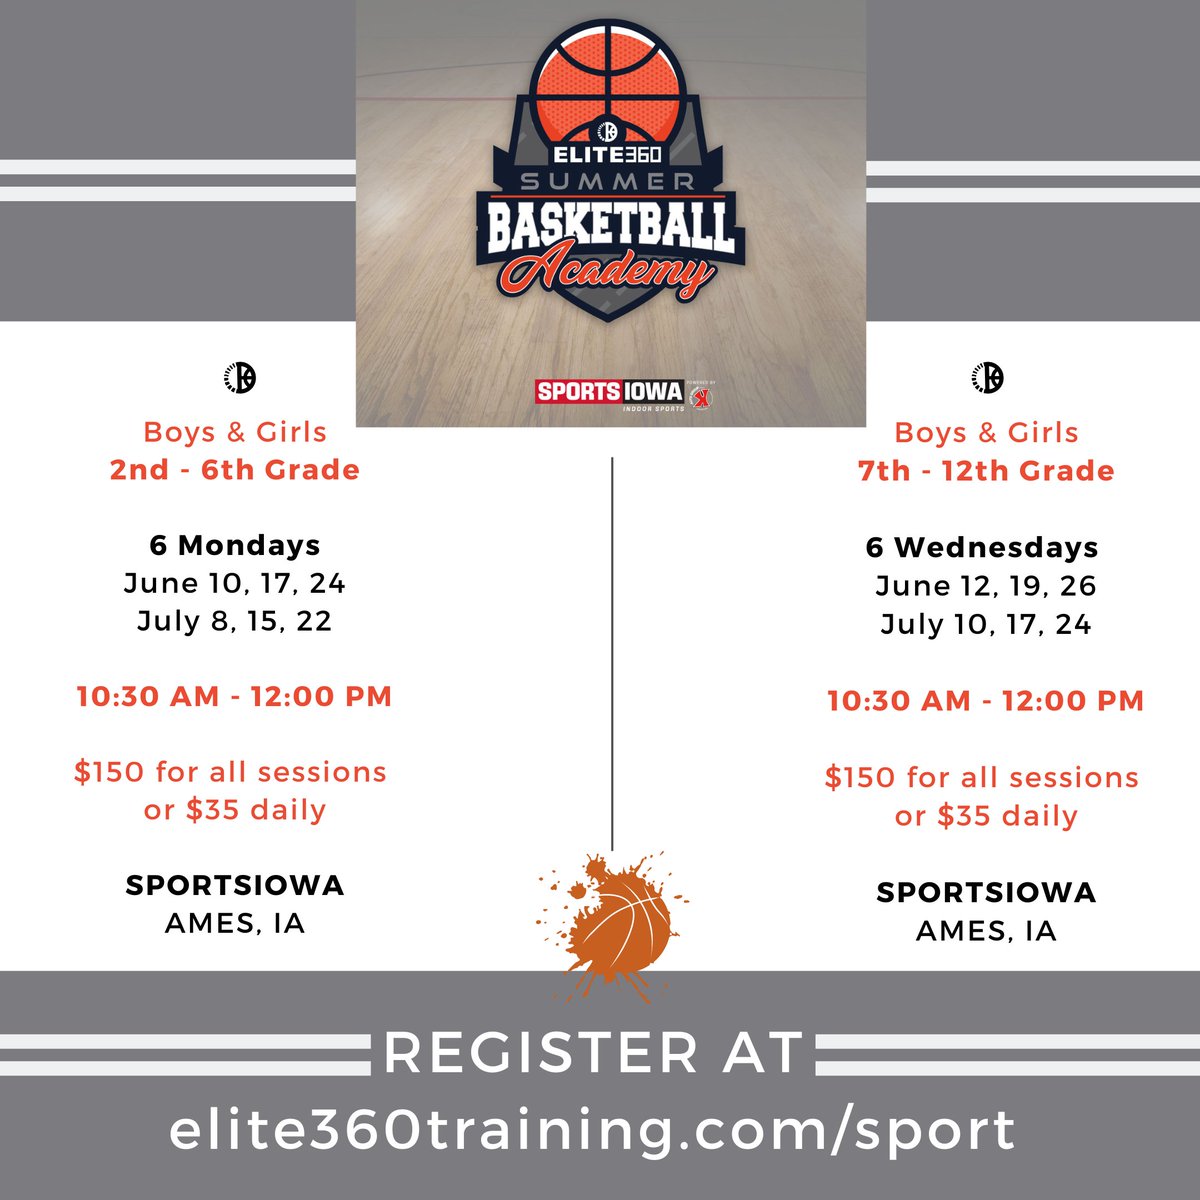 Our popular Summer Basketball Academy is filling up!🏀 Don't miss out, go to the link below to get registered & save your spot! This camp is a great way to improve your game, learn new skills, & have FUN on the court this summer. ➡️elite360training.com/sport